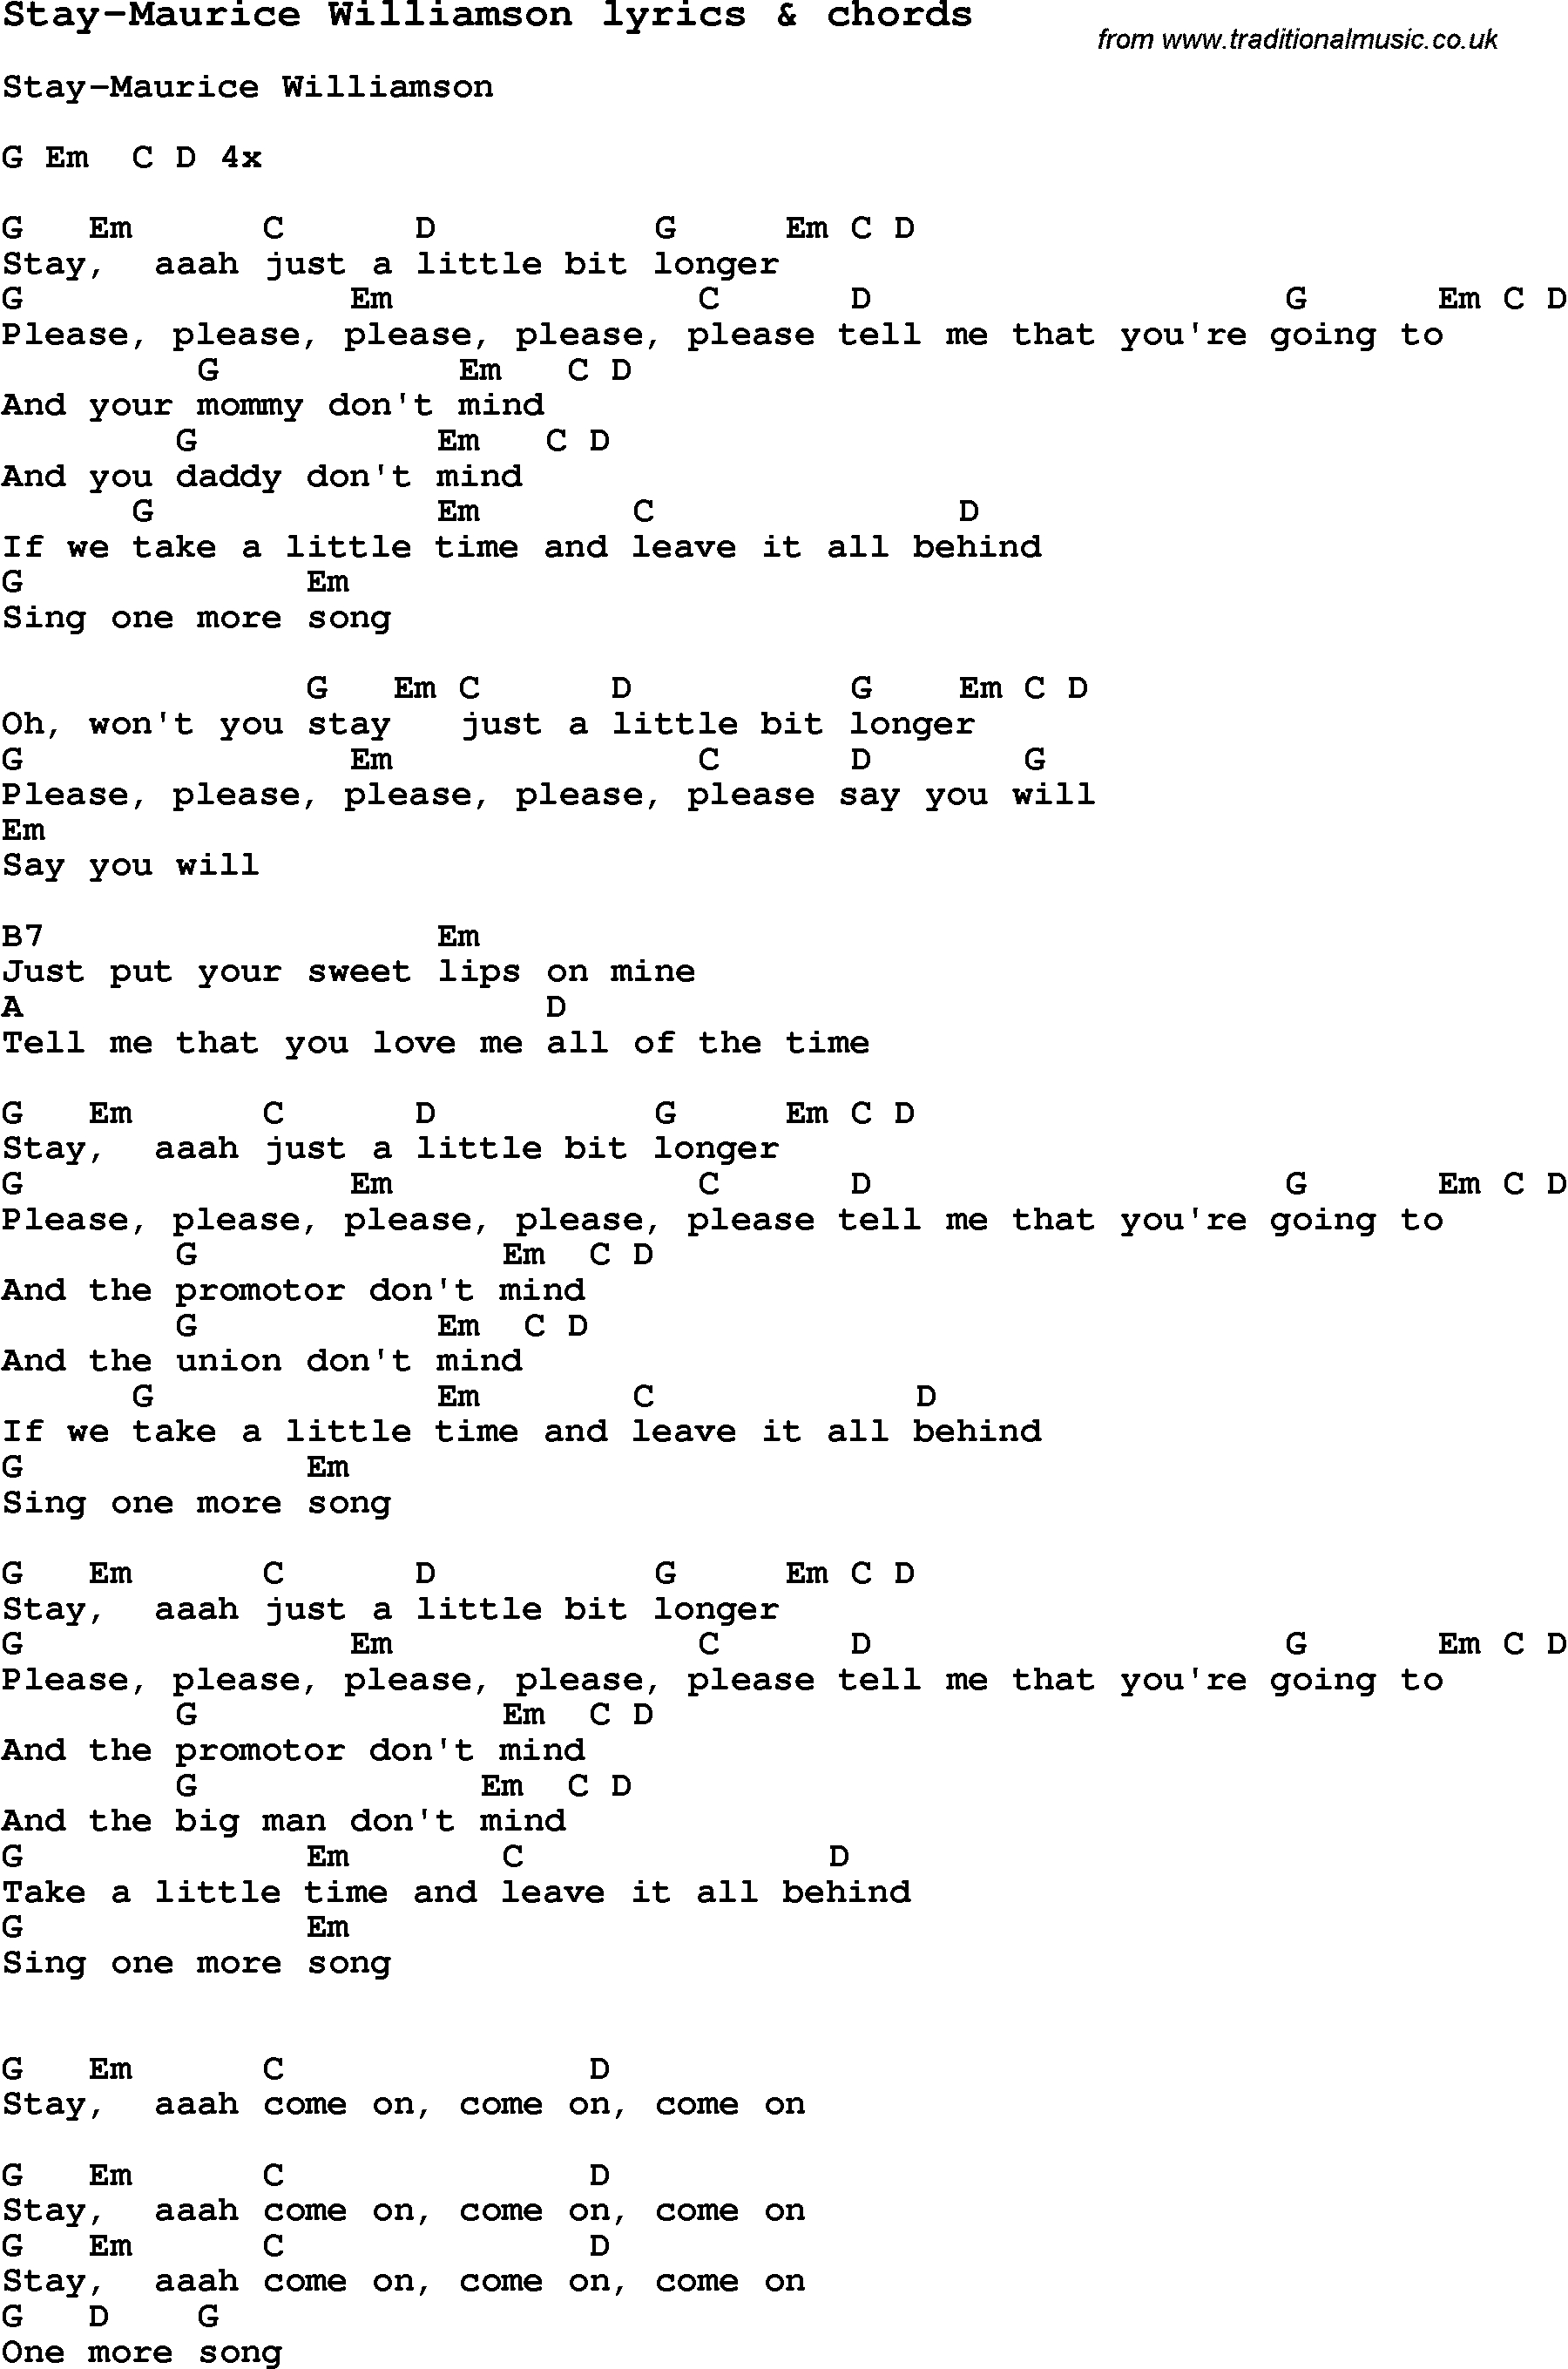 Stay With Me Ukulele Chords Love Song Lyrics Forstay Maurice Williamson With Chords